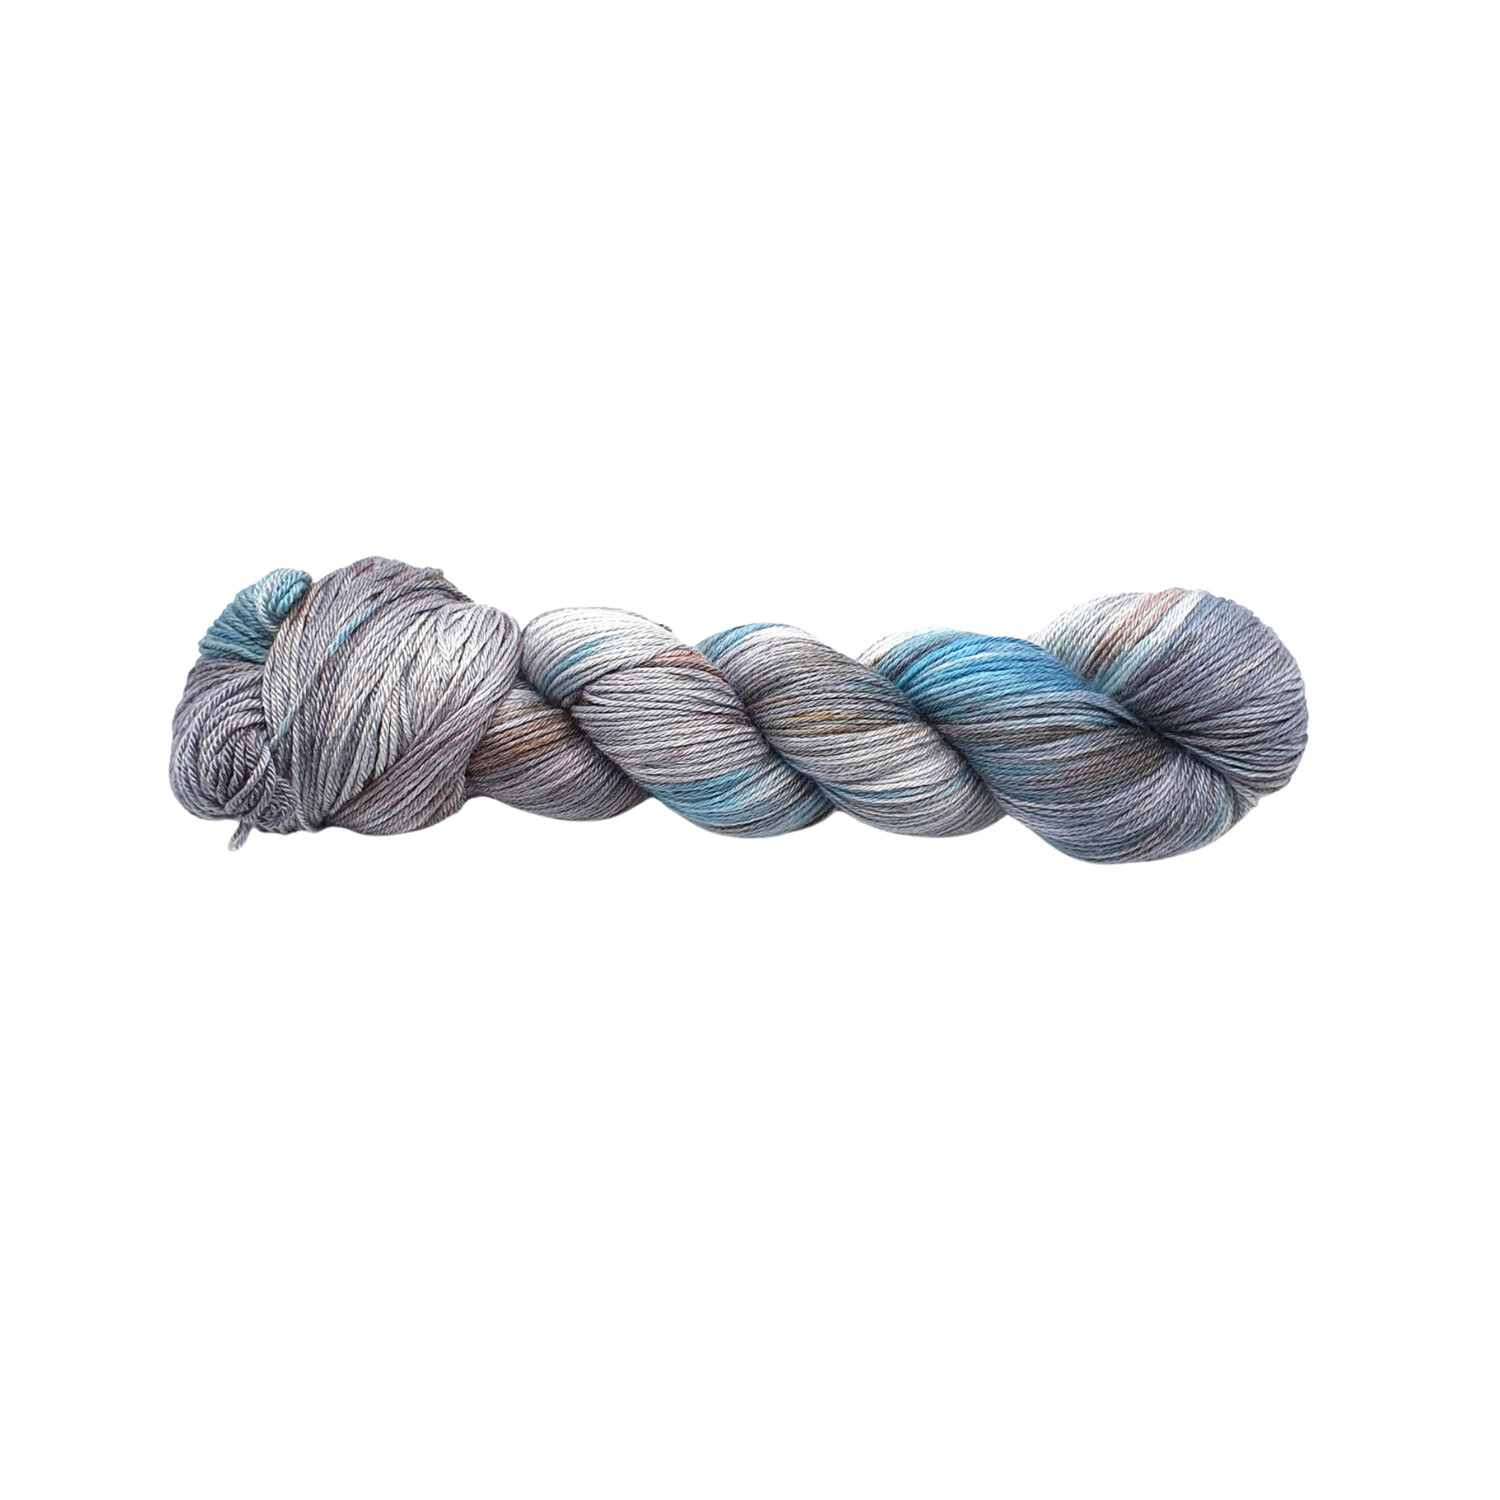 Faded Dreams - 4ply Astral